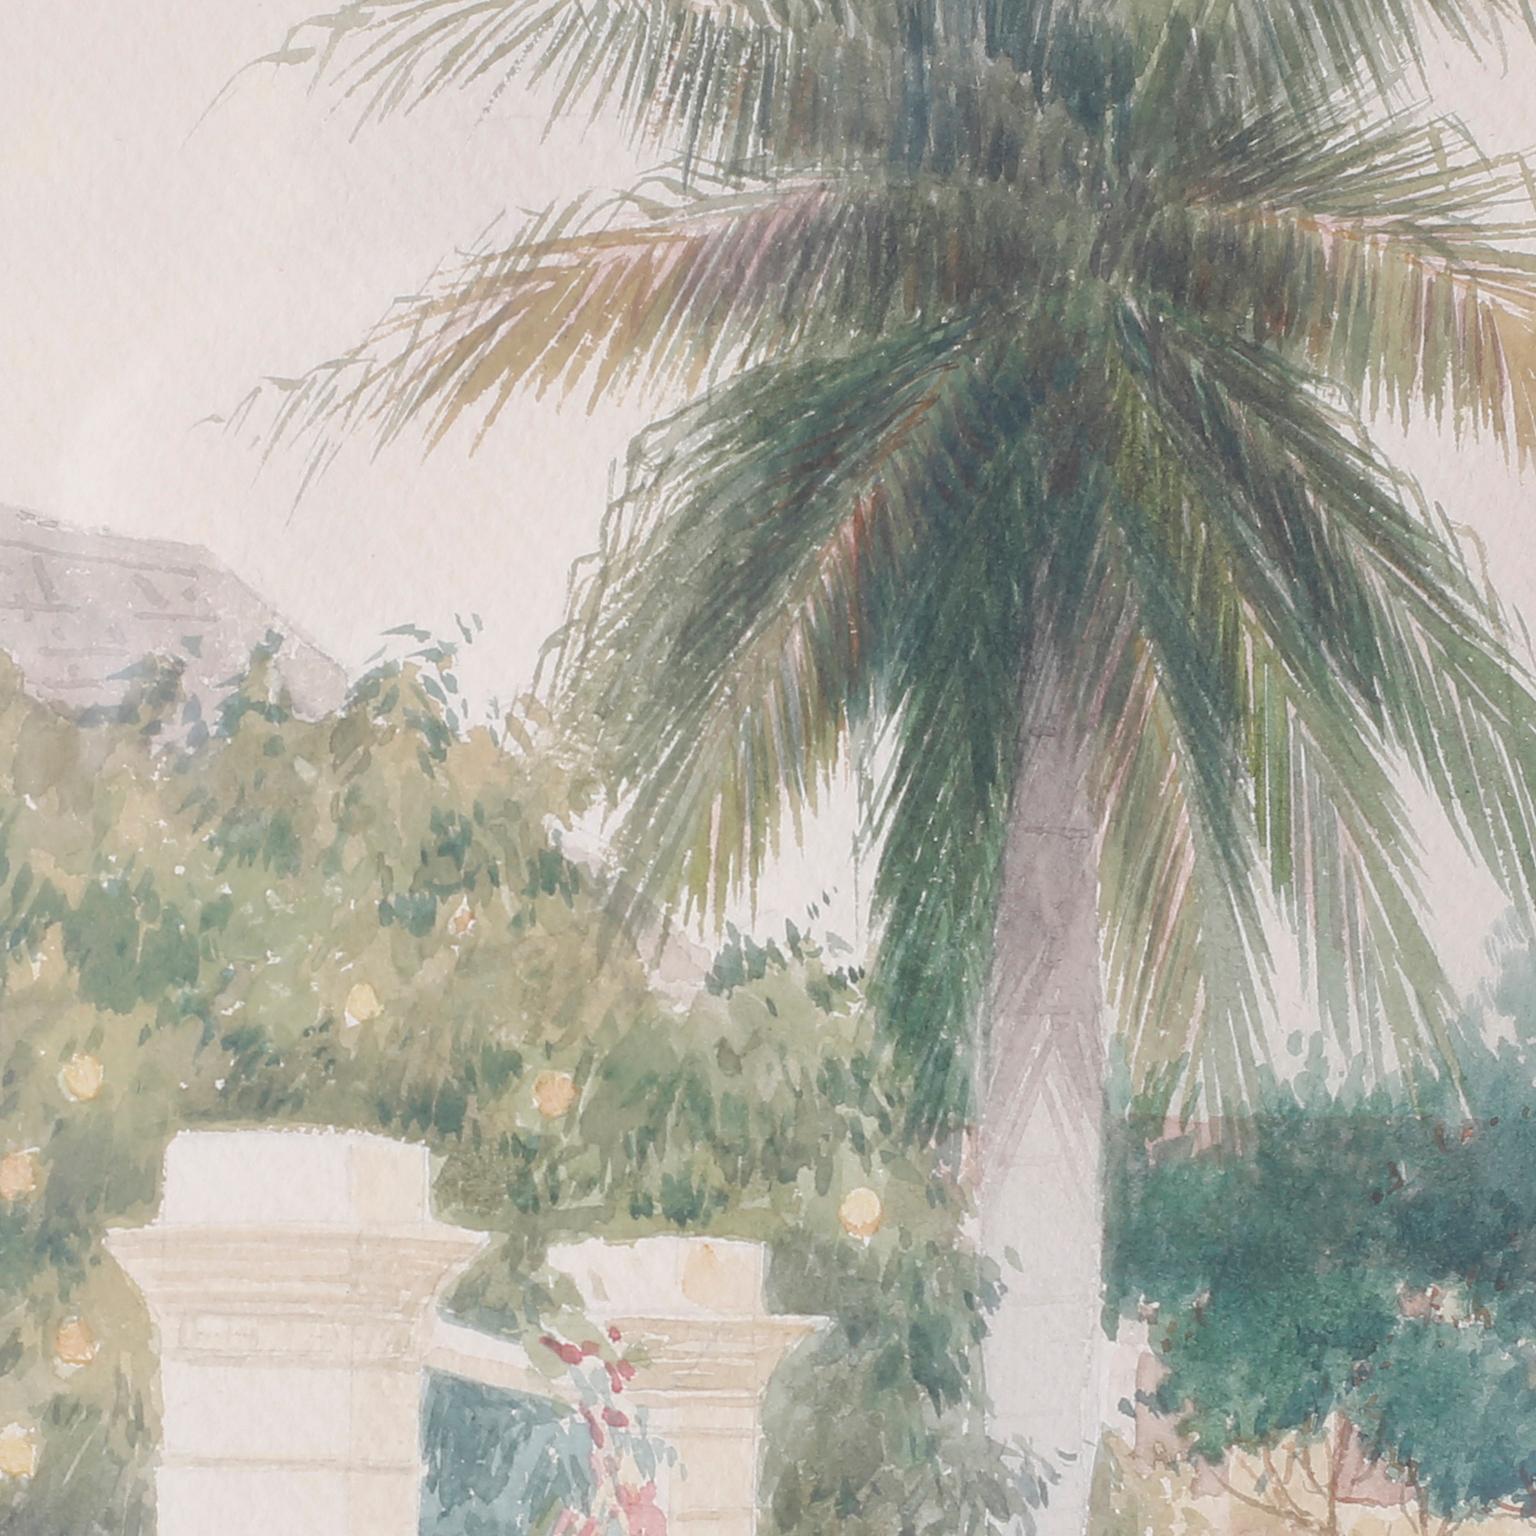 Watercolor painting of a Bahamian street scene possibly in Nassau. Complete with a woman carrying a bundle, a man in a cart, palm trees, house, gates and warm peaceful ambiance. Signed Hartwell Leon Woodcock in the lower left corner.